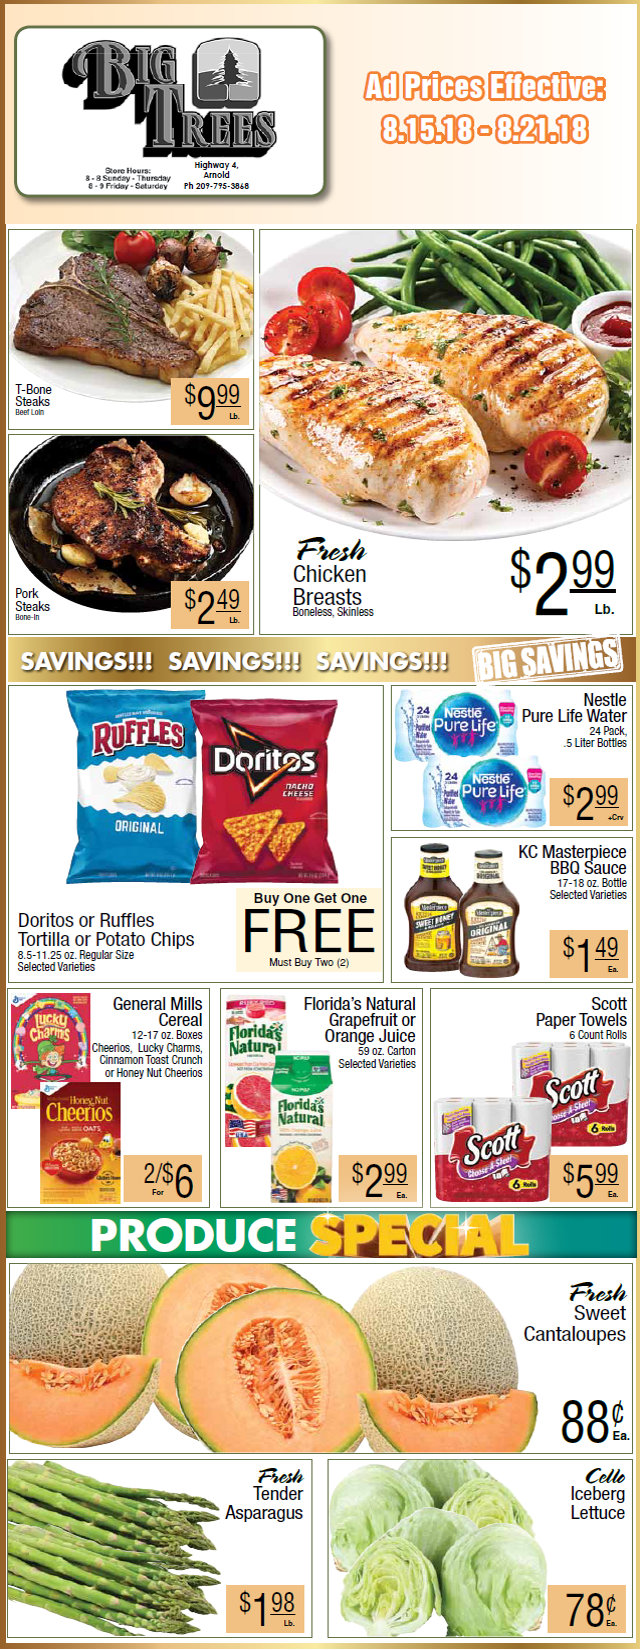 Big Trees Market Weekly Ad & Grocery Specials Though August 21